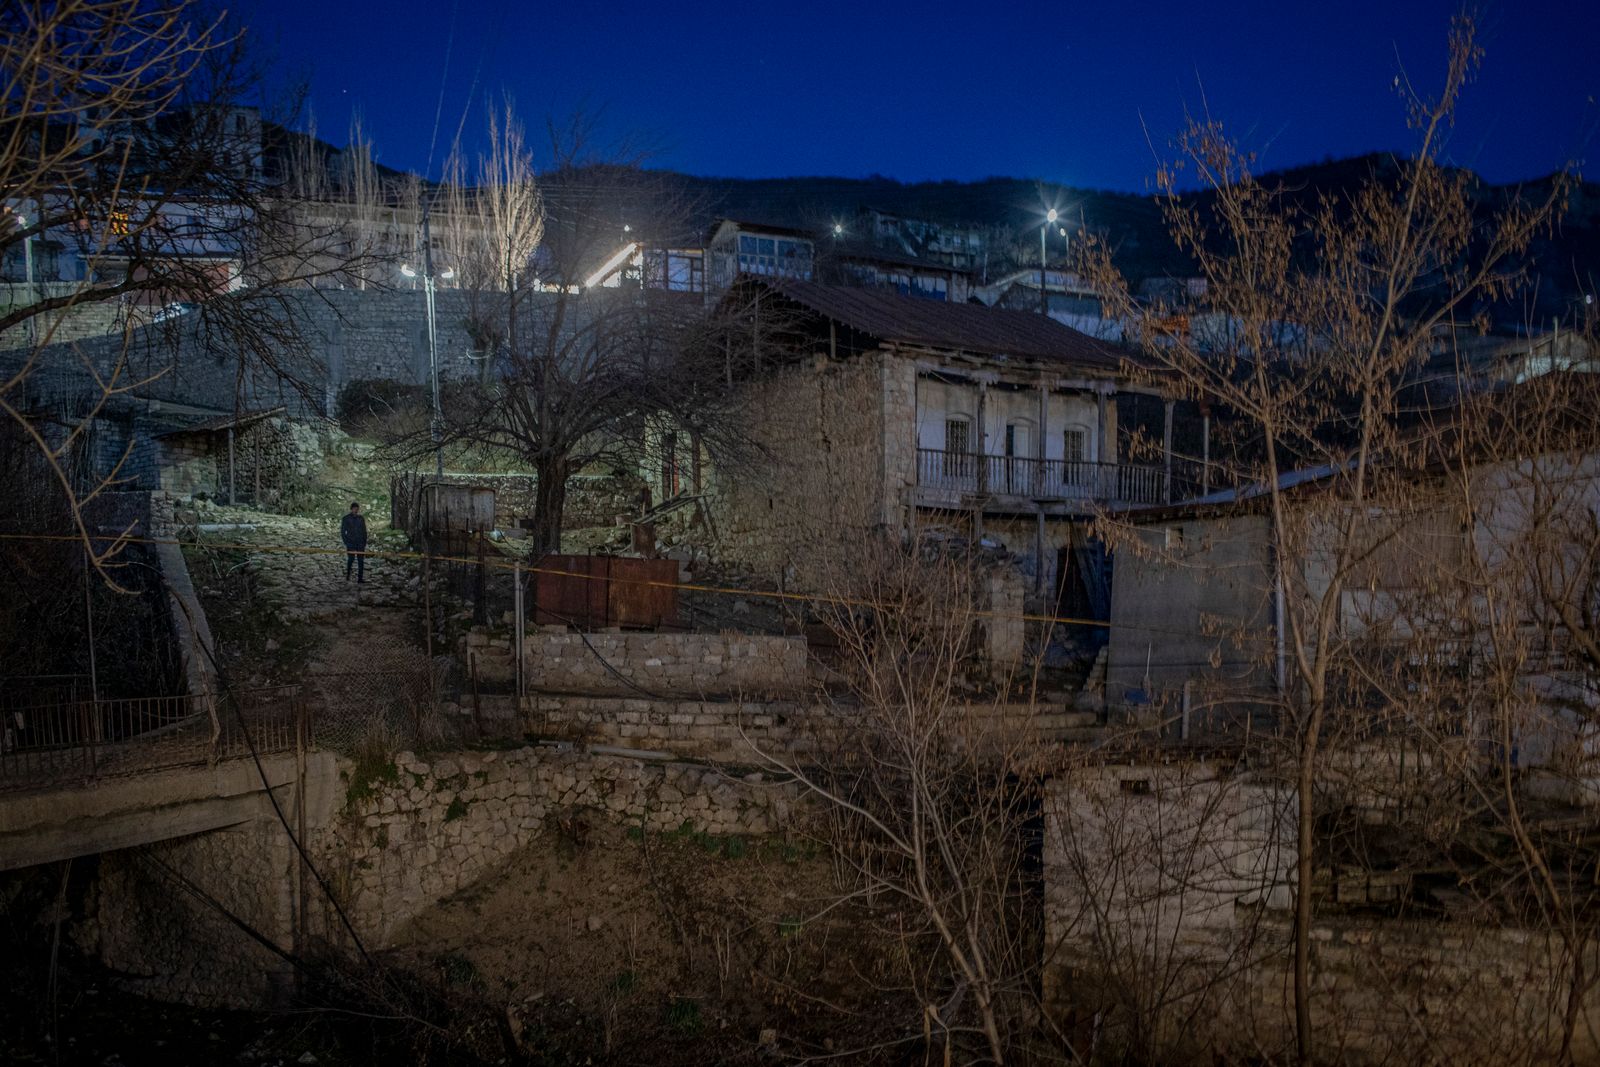 © Anush Babajanyan - View of the Mets Tagher village in Nagorno Karabakh, on February 27, 2020.